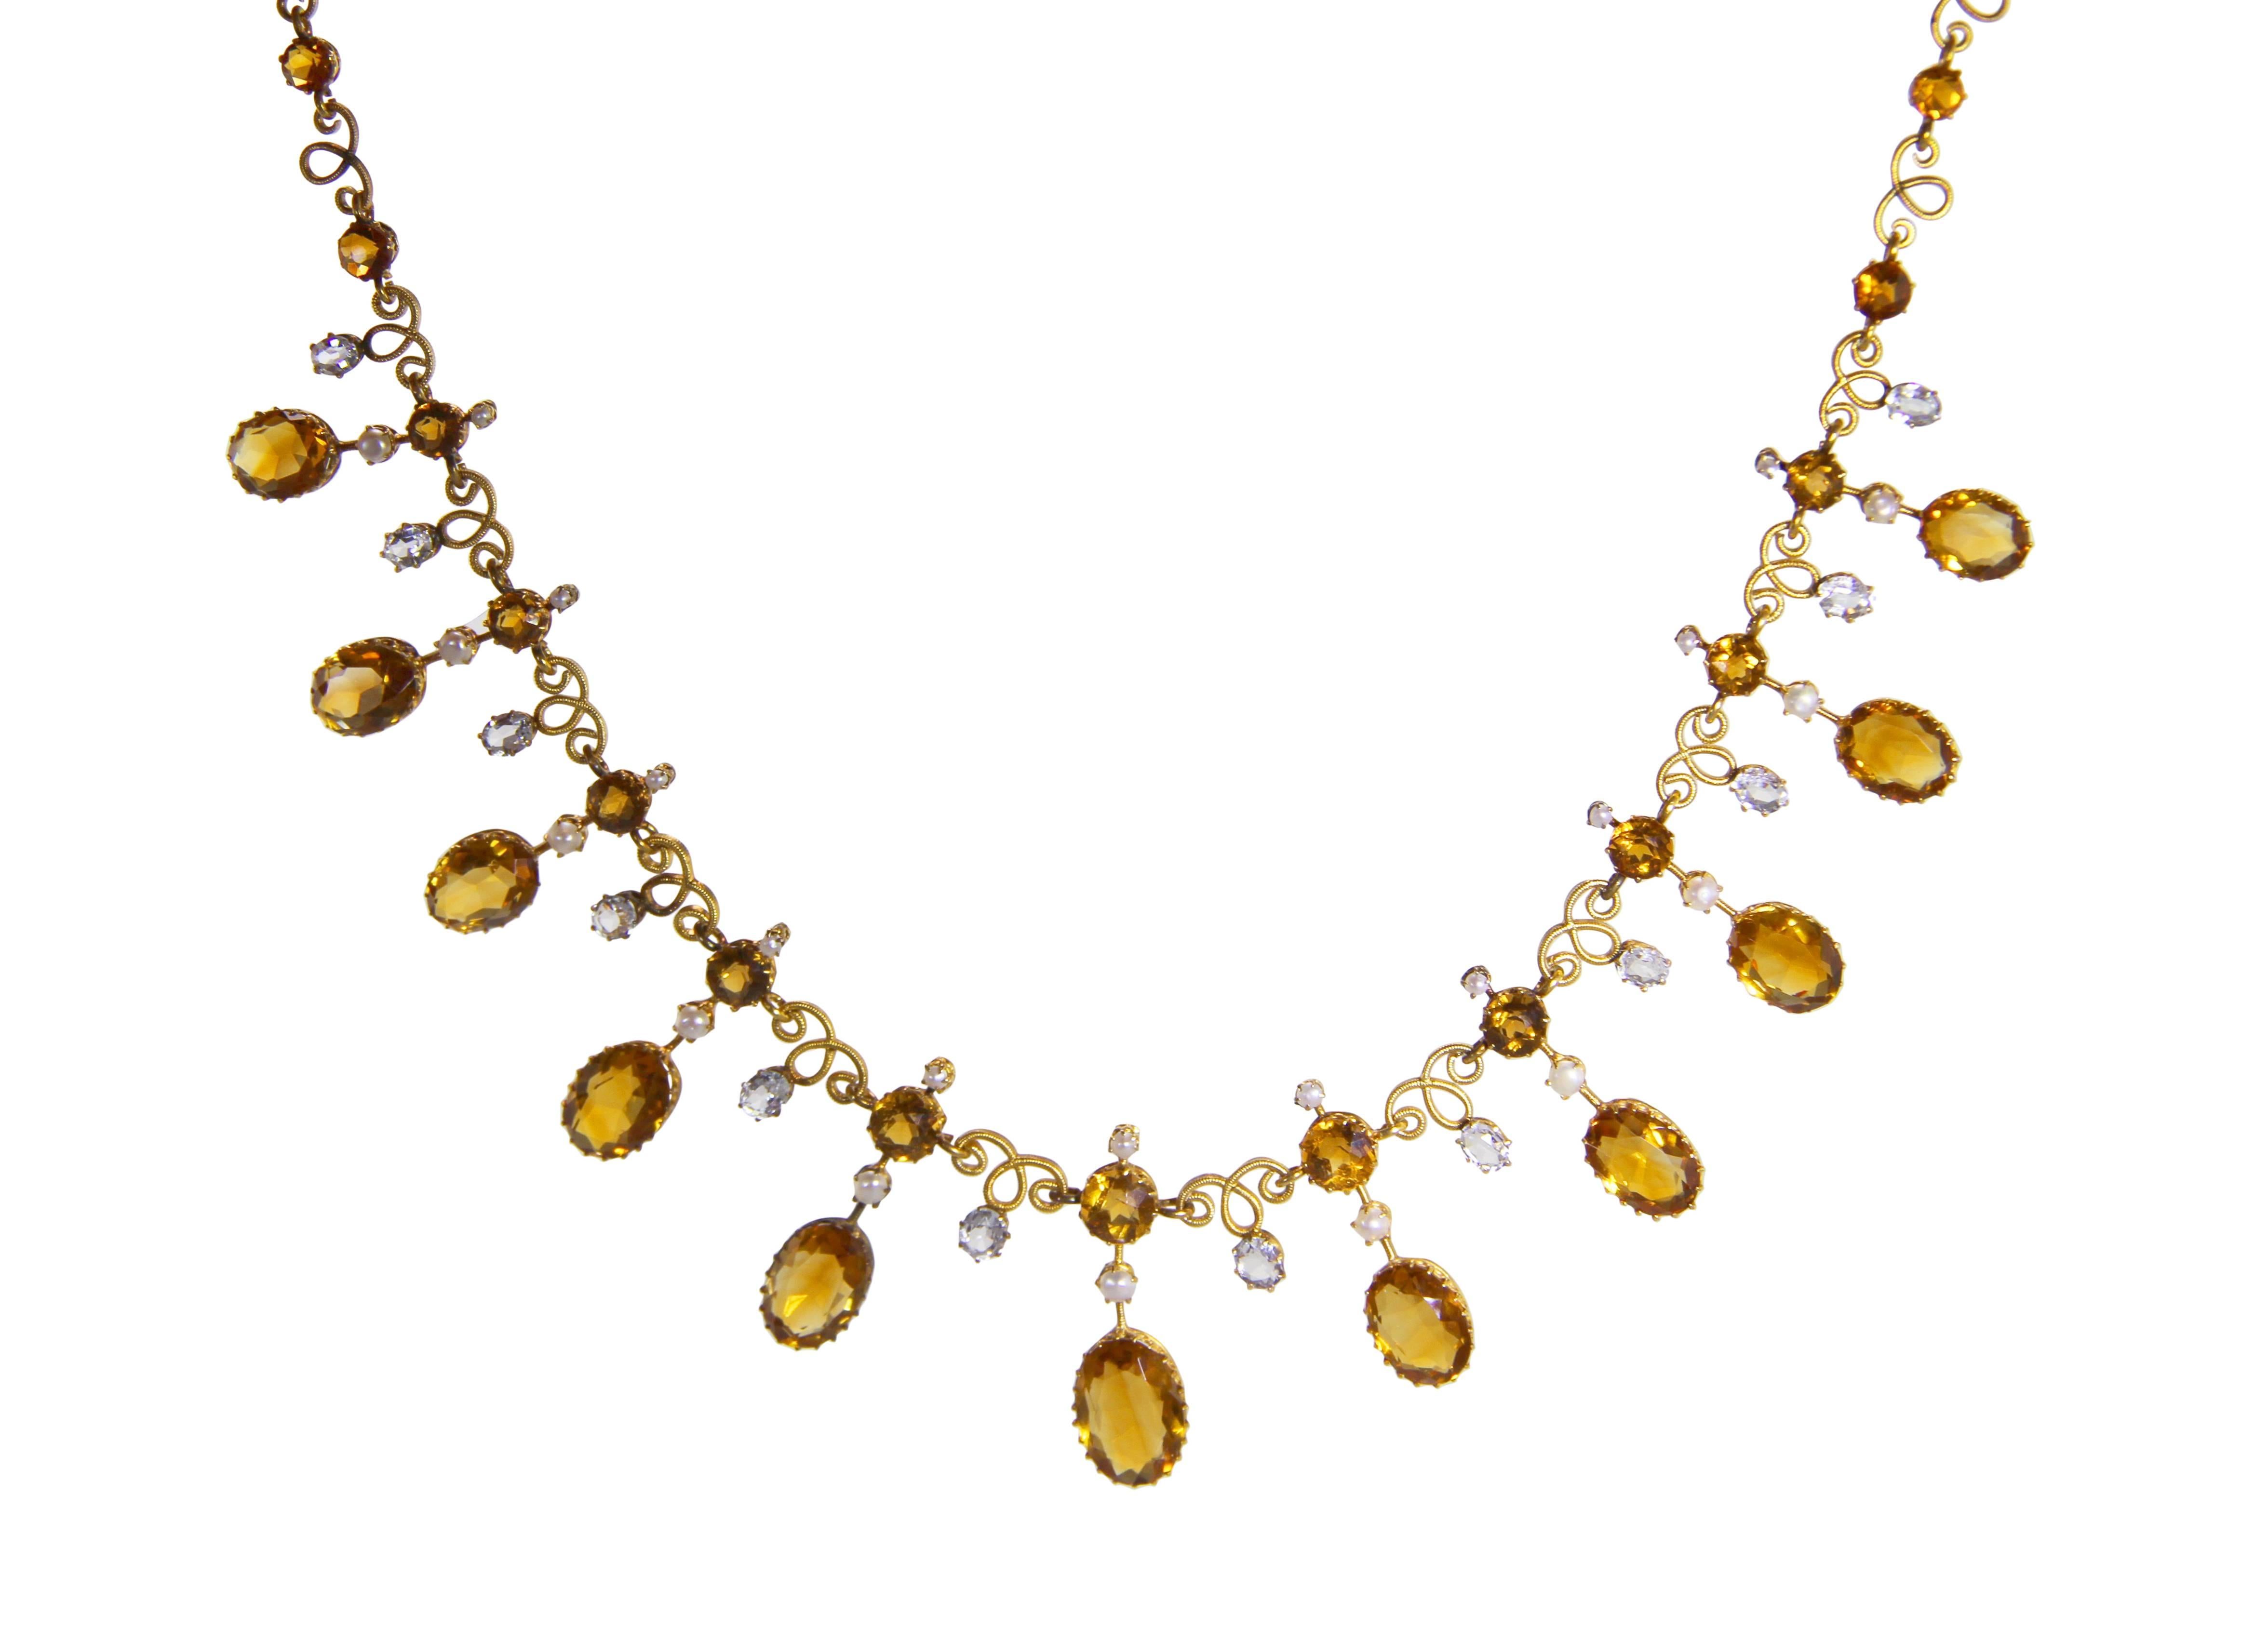 An antique 14 karat gold, citrine quartz, white sapphire and seed pearl necklace, the necklace set with 27 round citrines weighing approximately 9.00 carats, suspending 12 oval citrines of graduating size weighing approximately 20.00 carats,